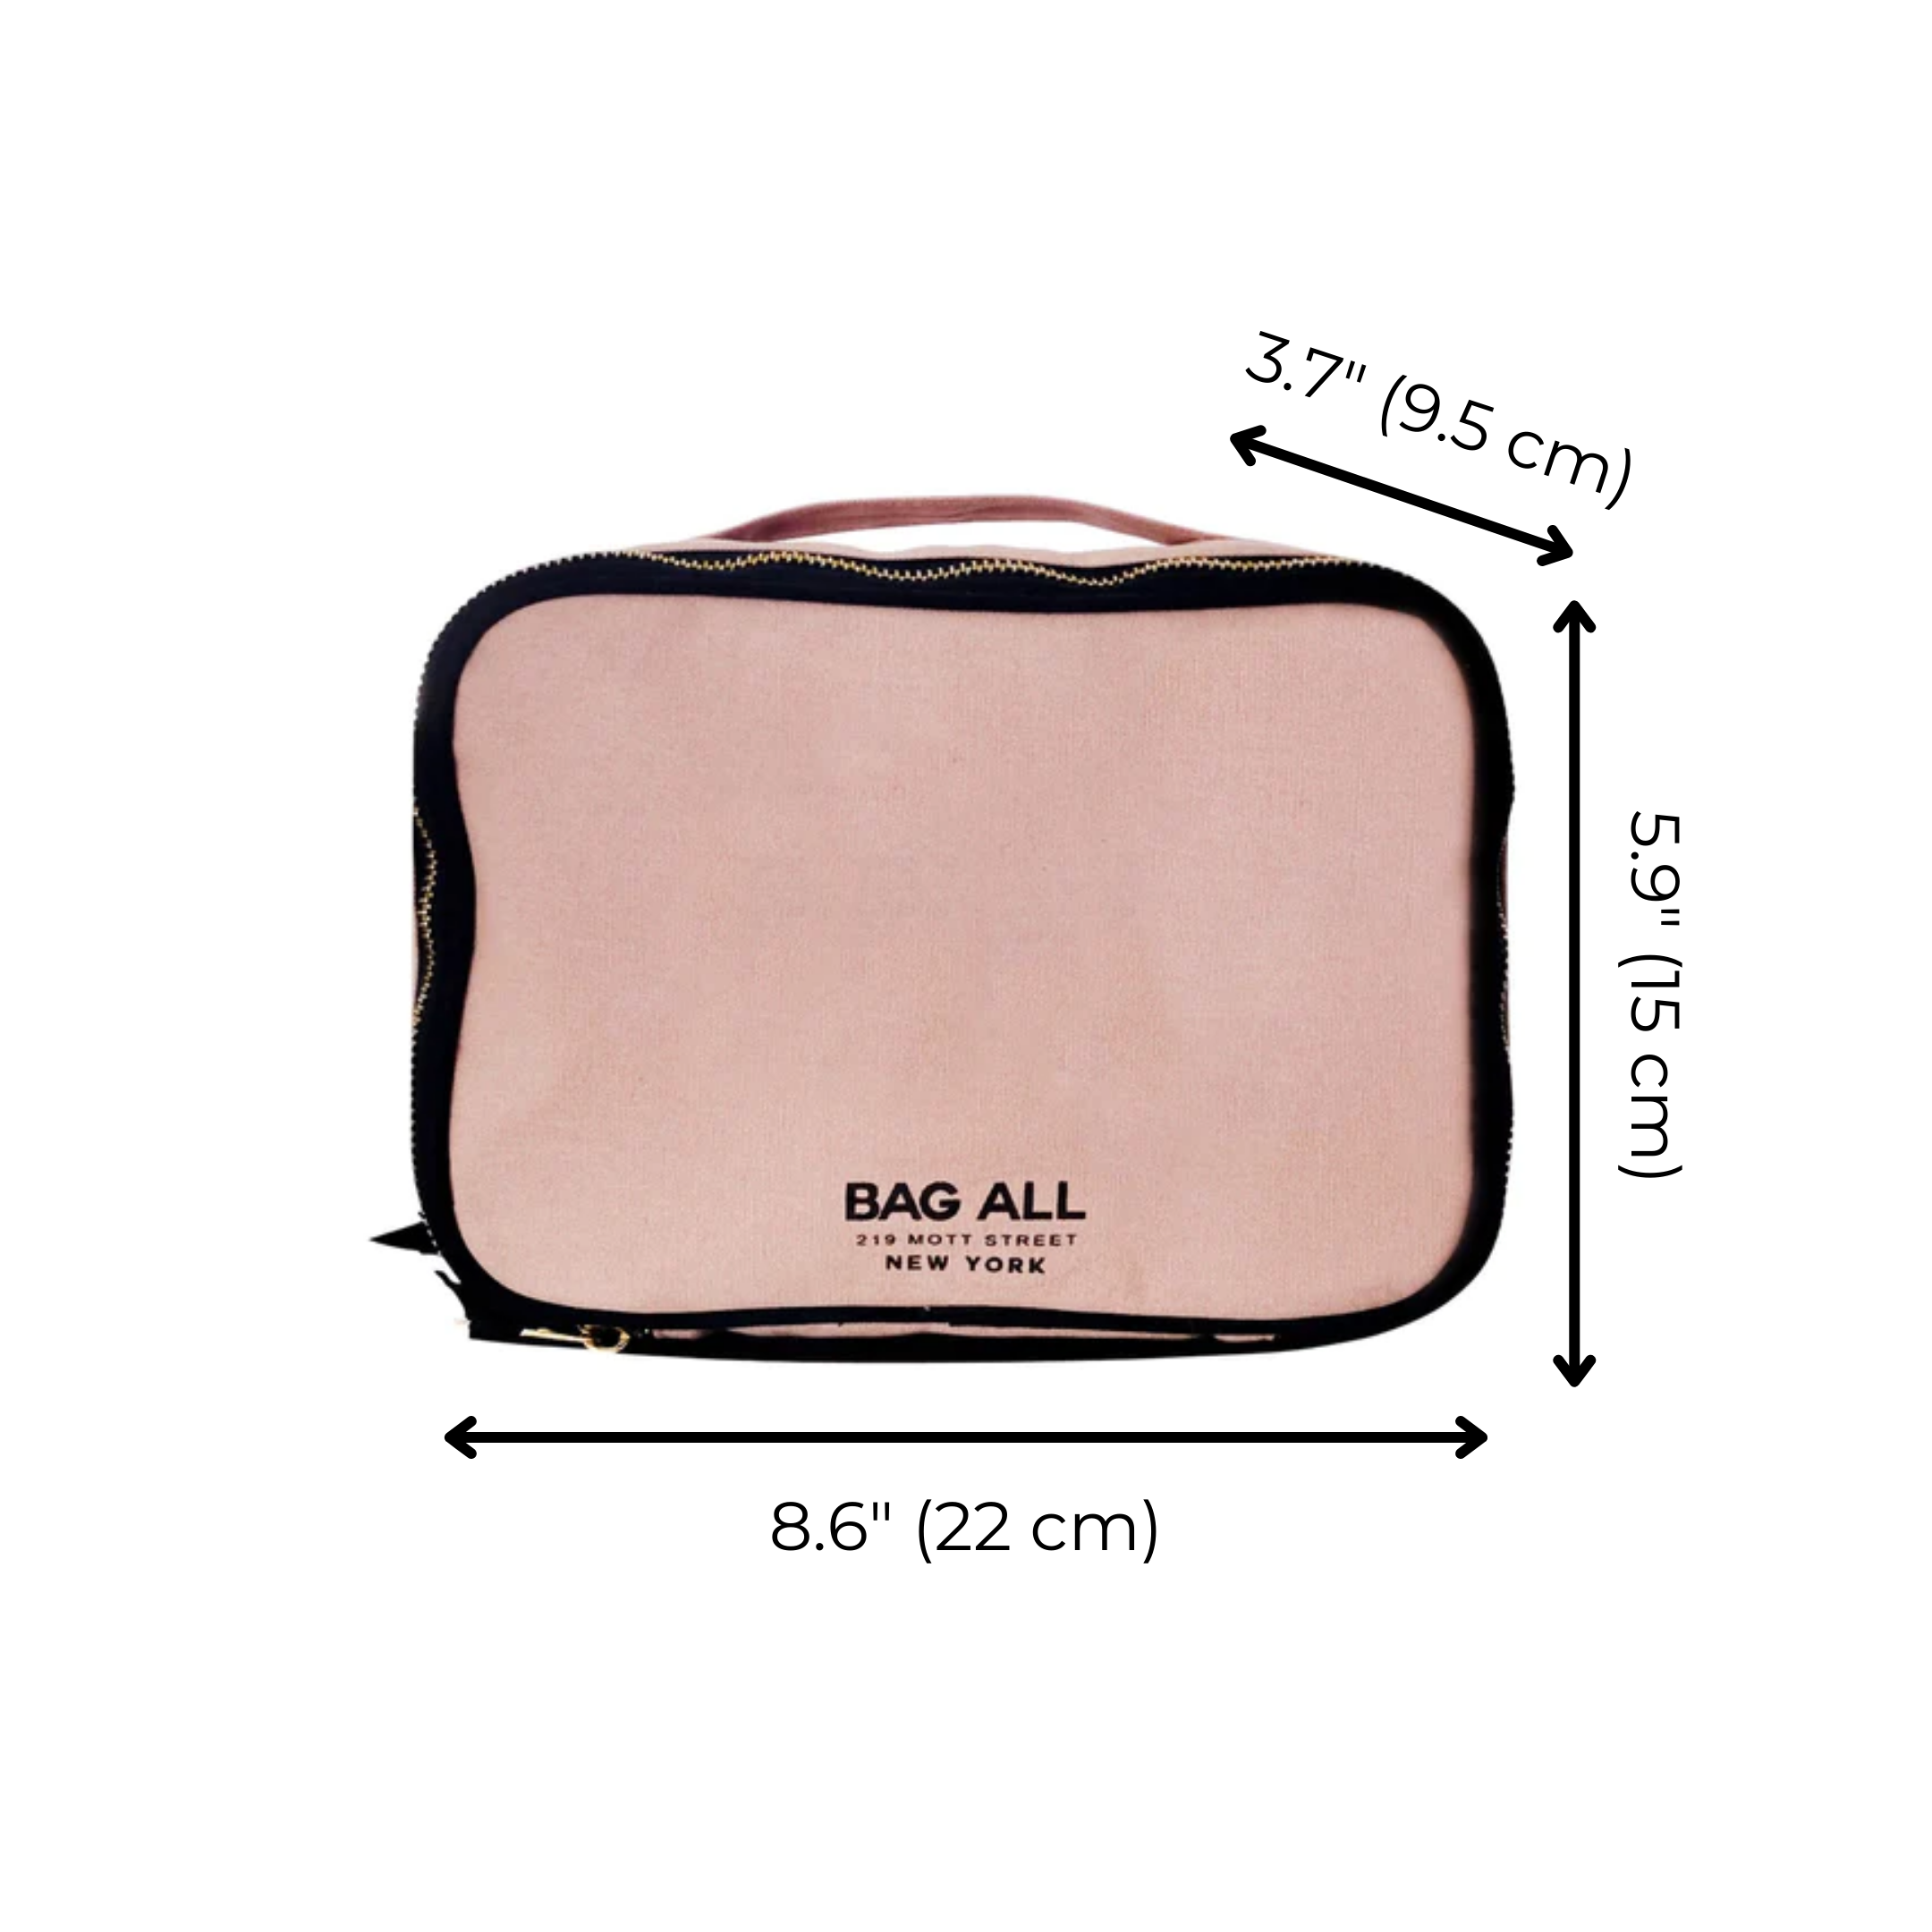 Double Sided Toiletry Case, Pink/Blush | Bag-all